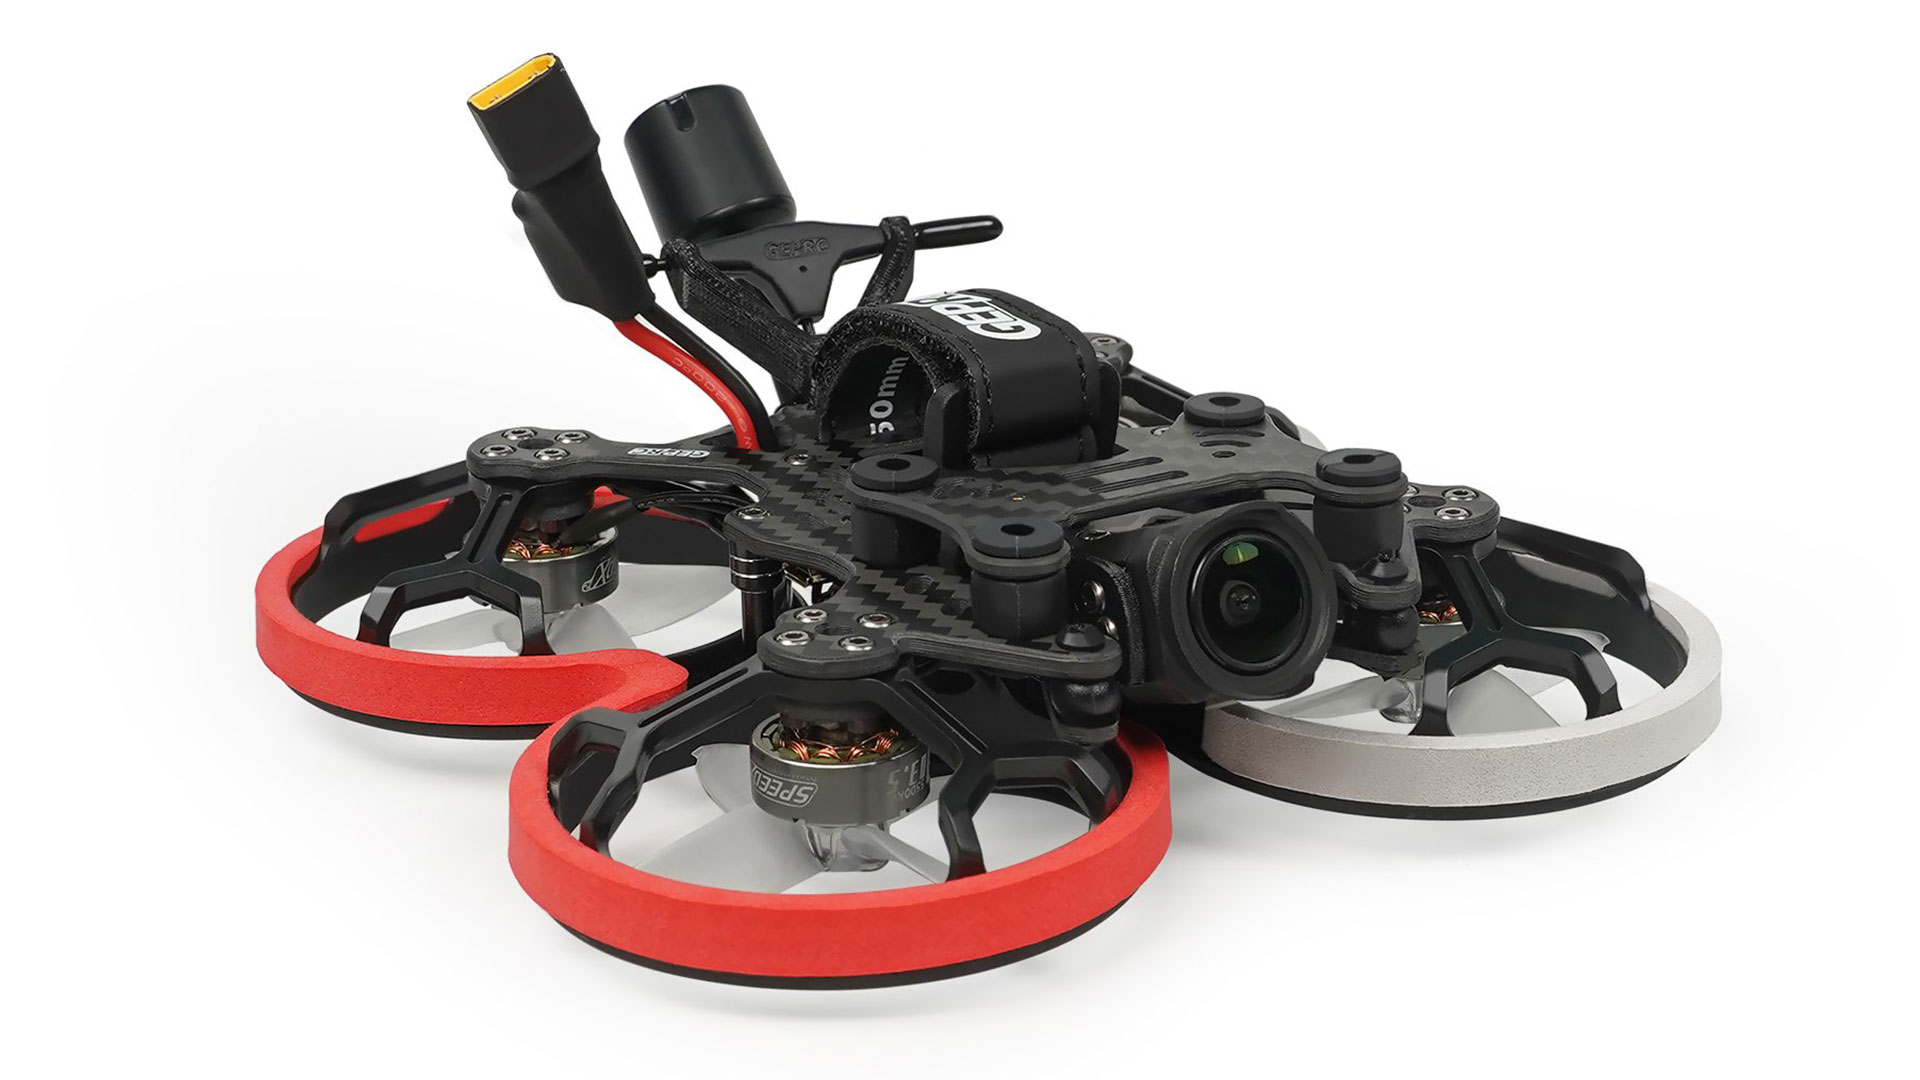 Review: GEPRC Cinelog 20 With DJI 03 A Tiny 4K Cinewhoop, 51% OFF